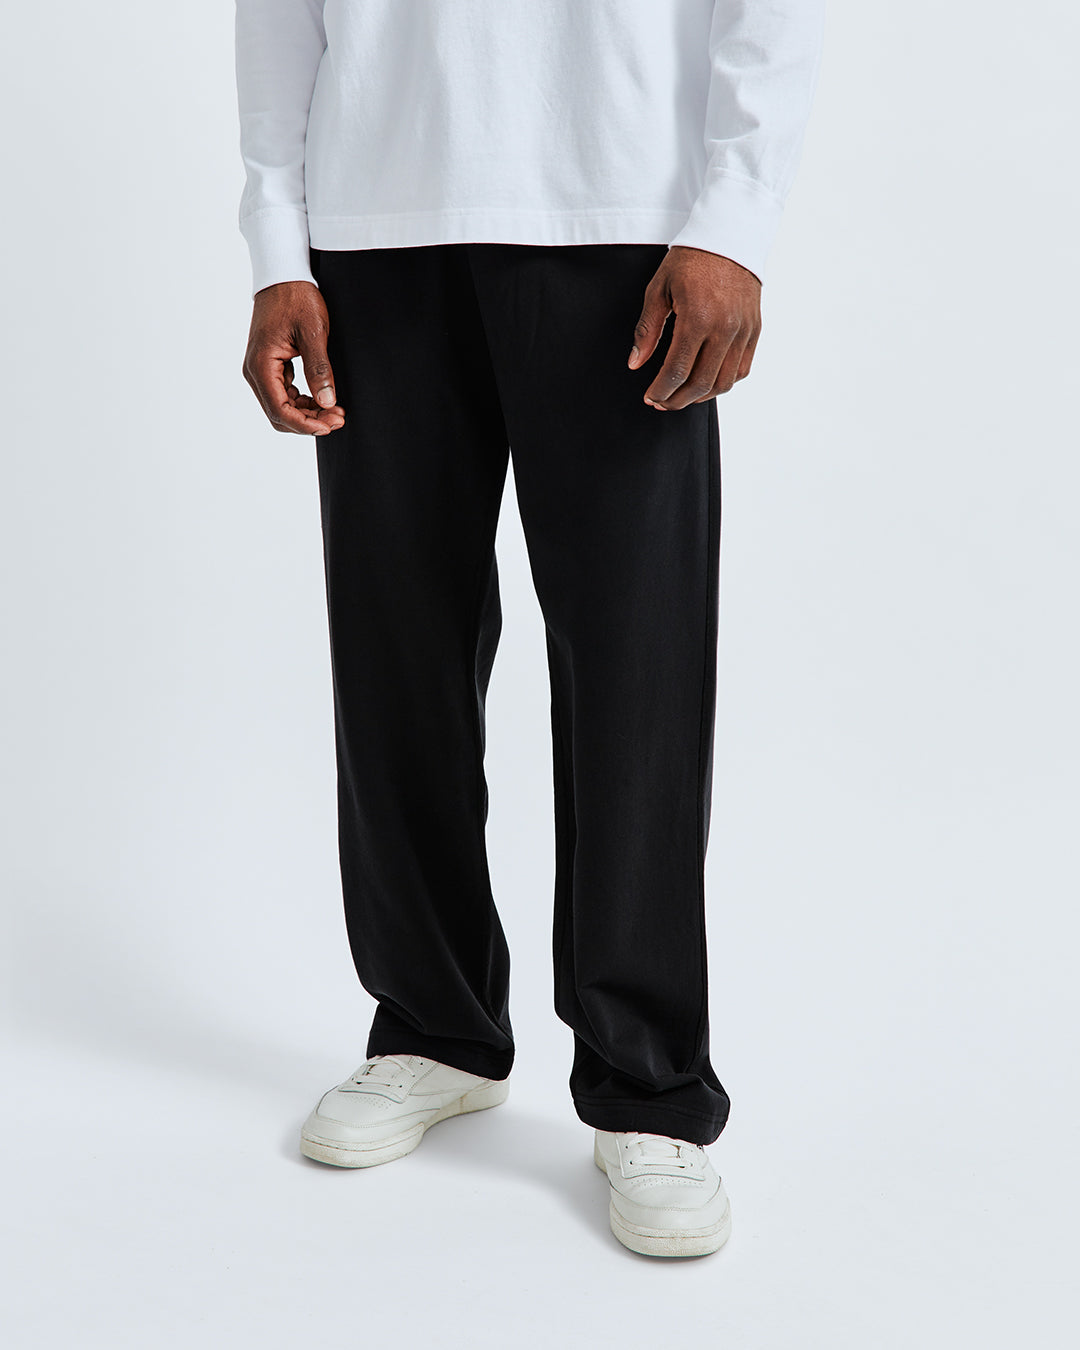 Reigning Champ Men's Midweight Terry Cuffed Sweatpants, Black, XS at   Men's Clothing store